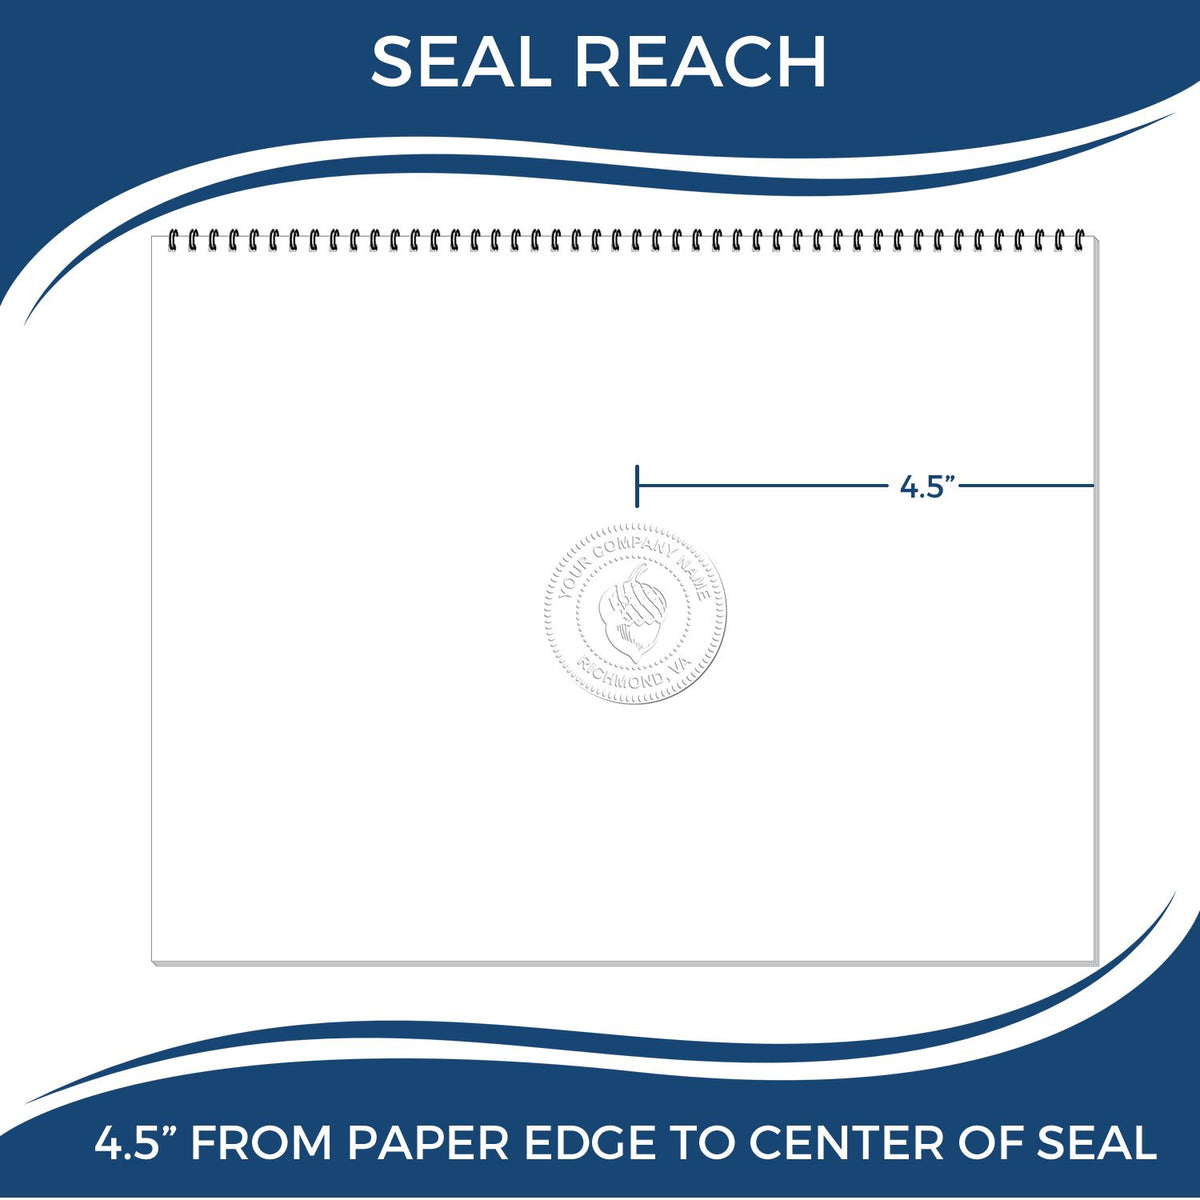 An infographic showing the seal reach which is represented by a ruler and a miniature seal image of the Extended Long Reach Maine Surveyor Embosser